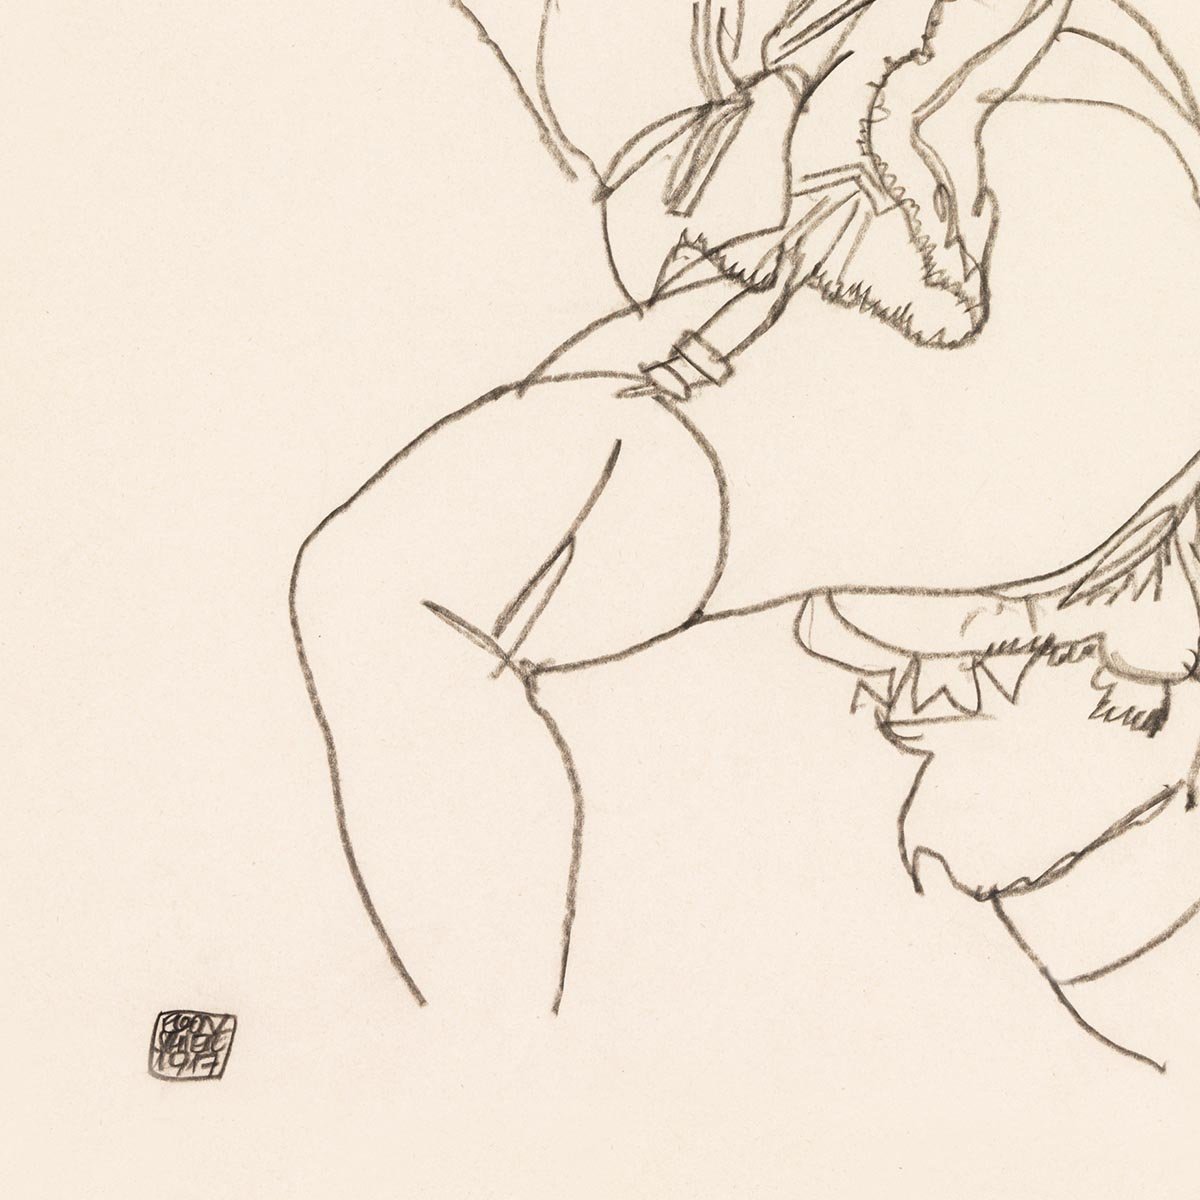 Reclining Model in Chemise and Stockings by Egon Schiele